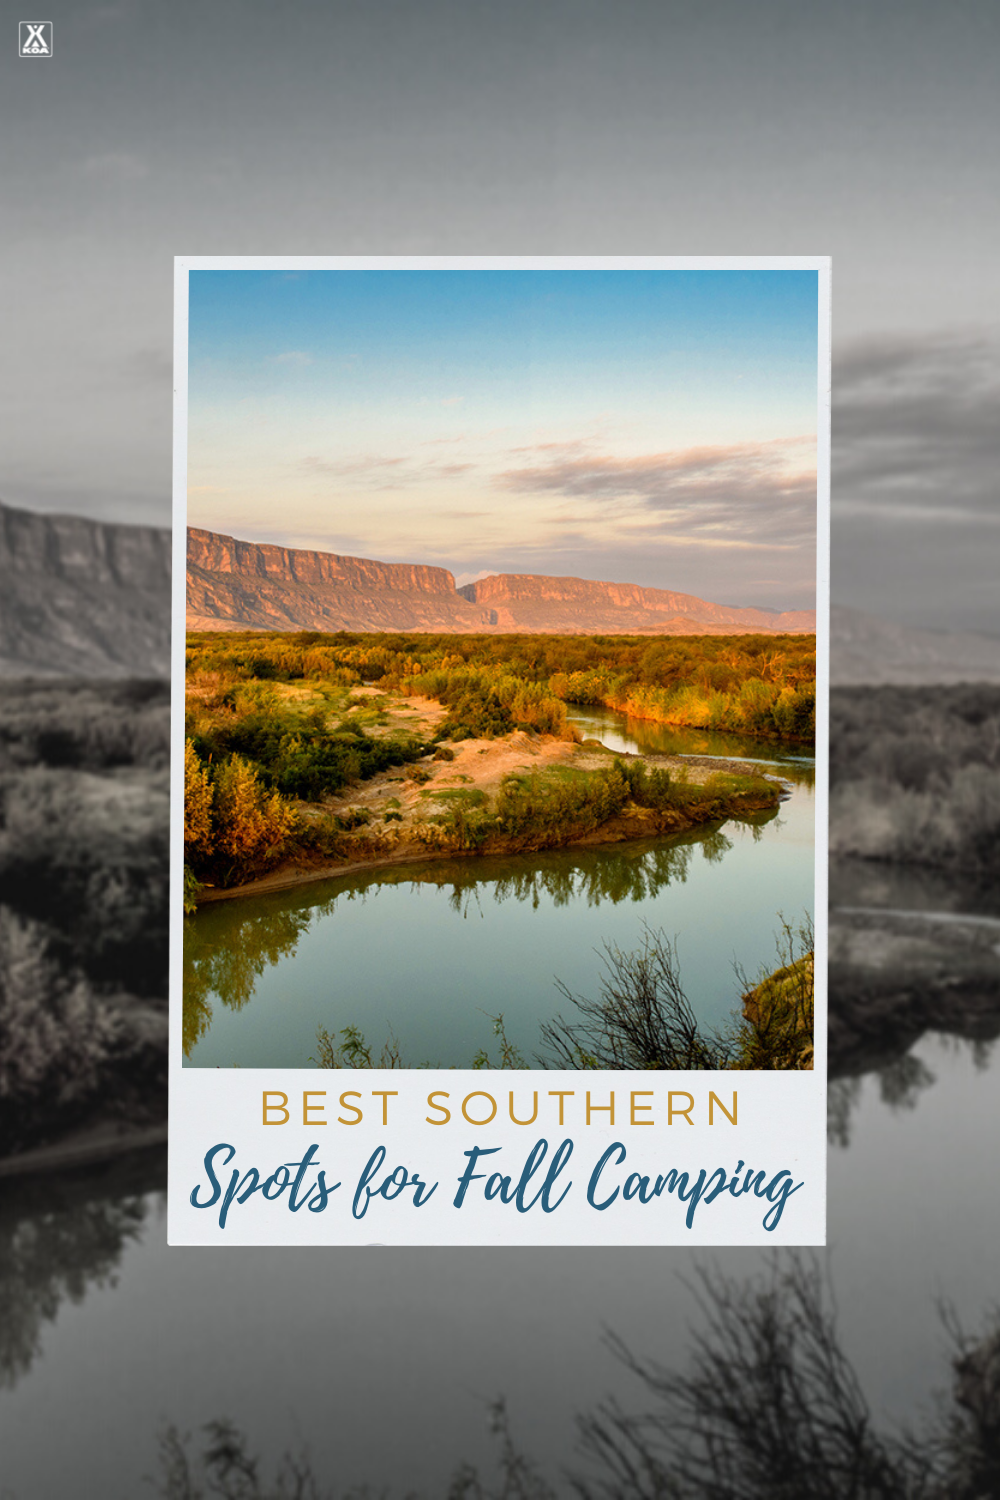 Fall is a perfect time to camp and these spots are sure to please! Try adding some of these new southern spots to your list to experience fall camping in a way you may have never experienced it before.